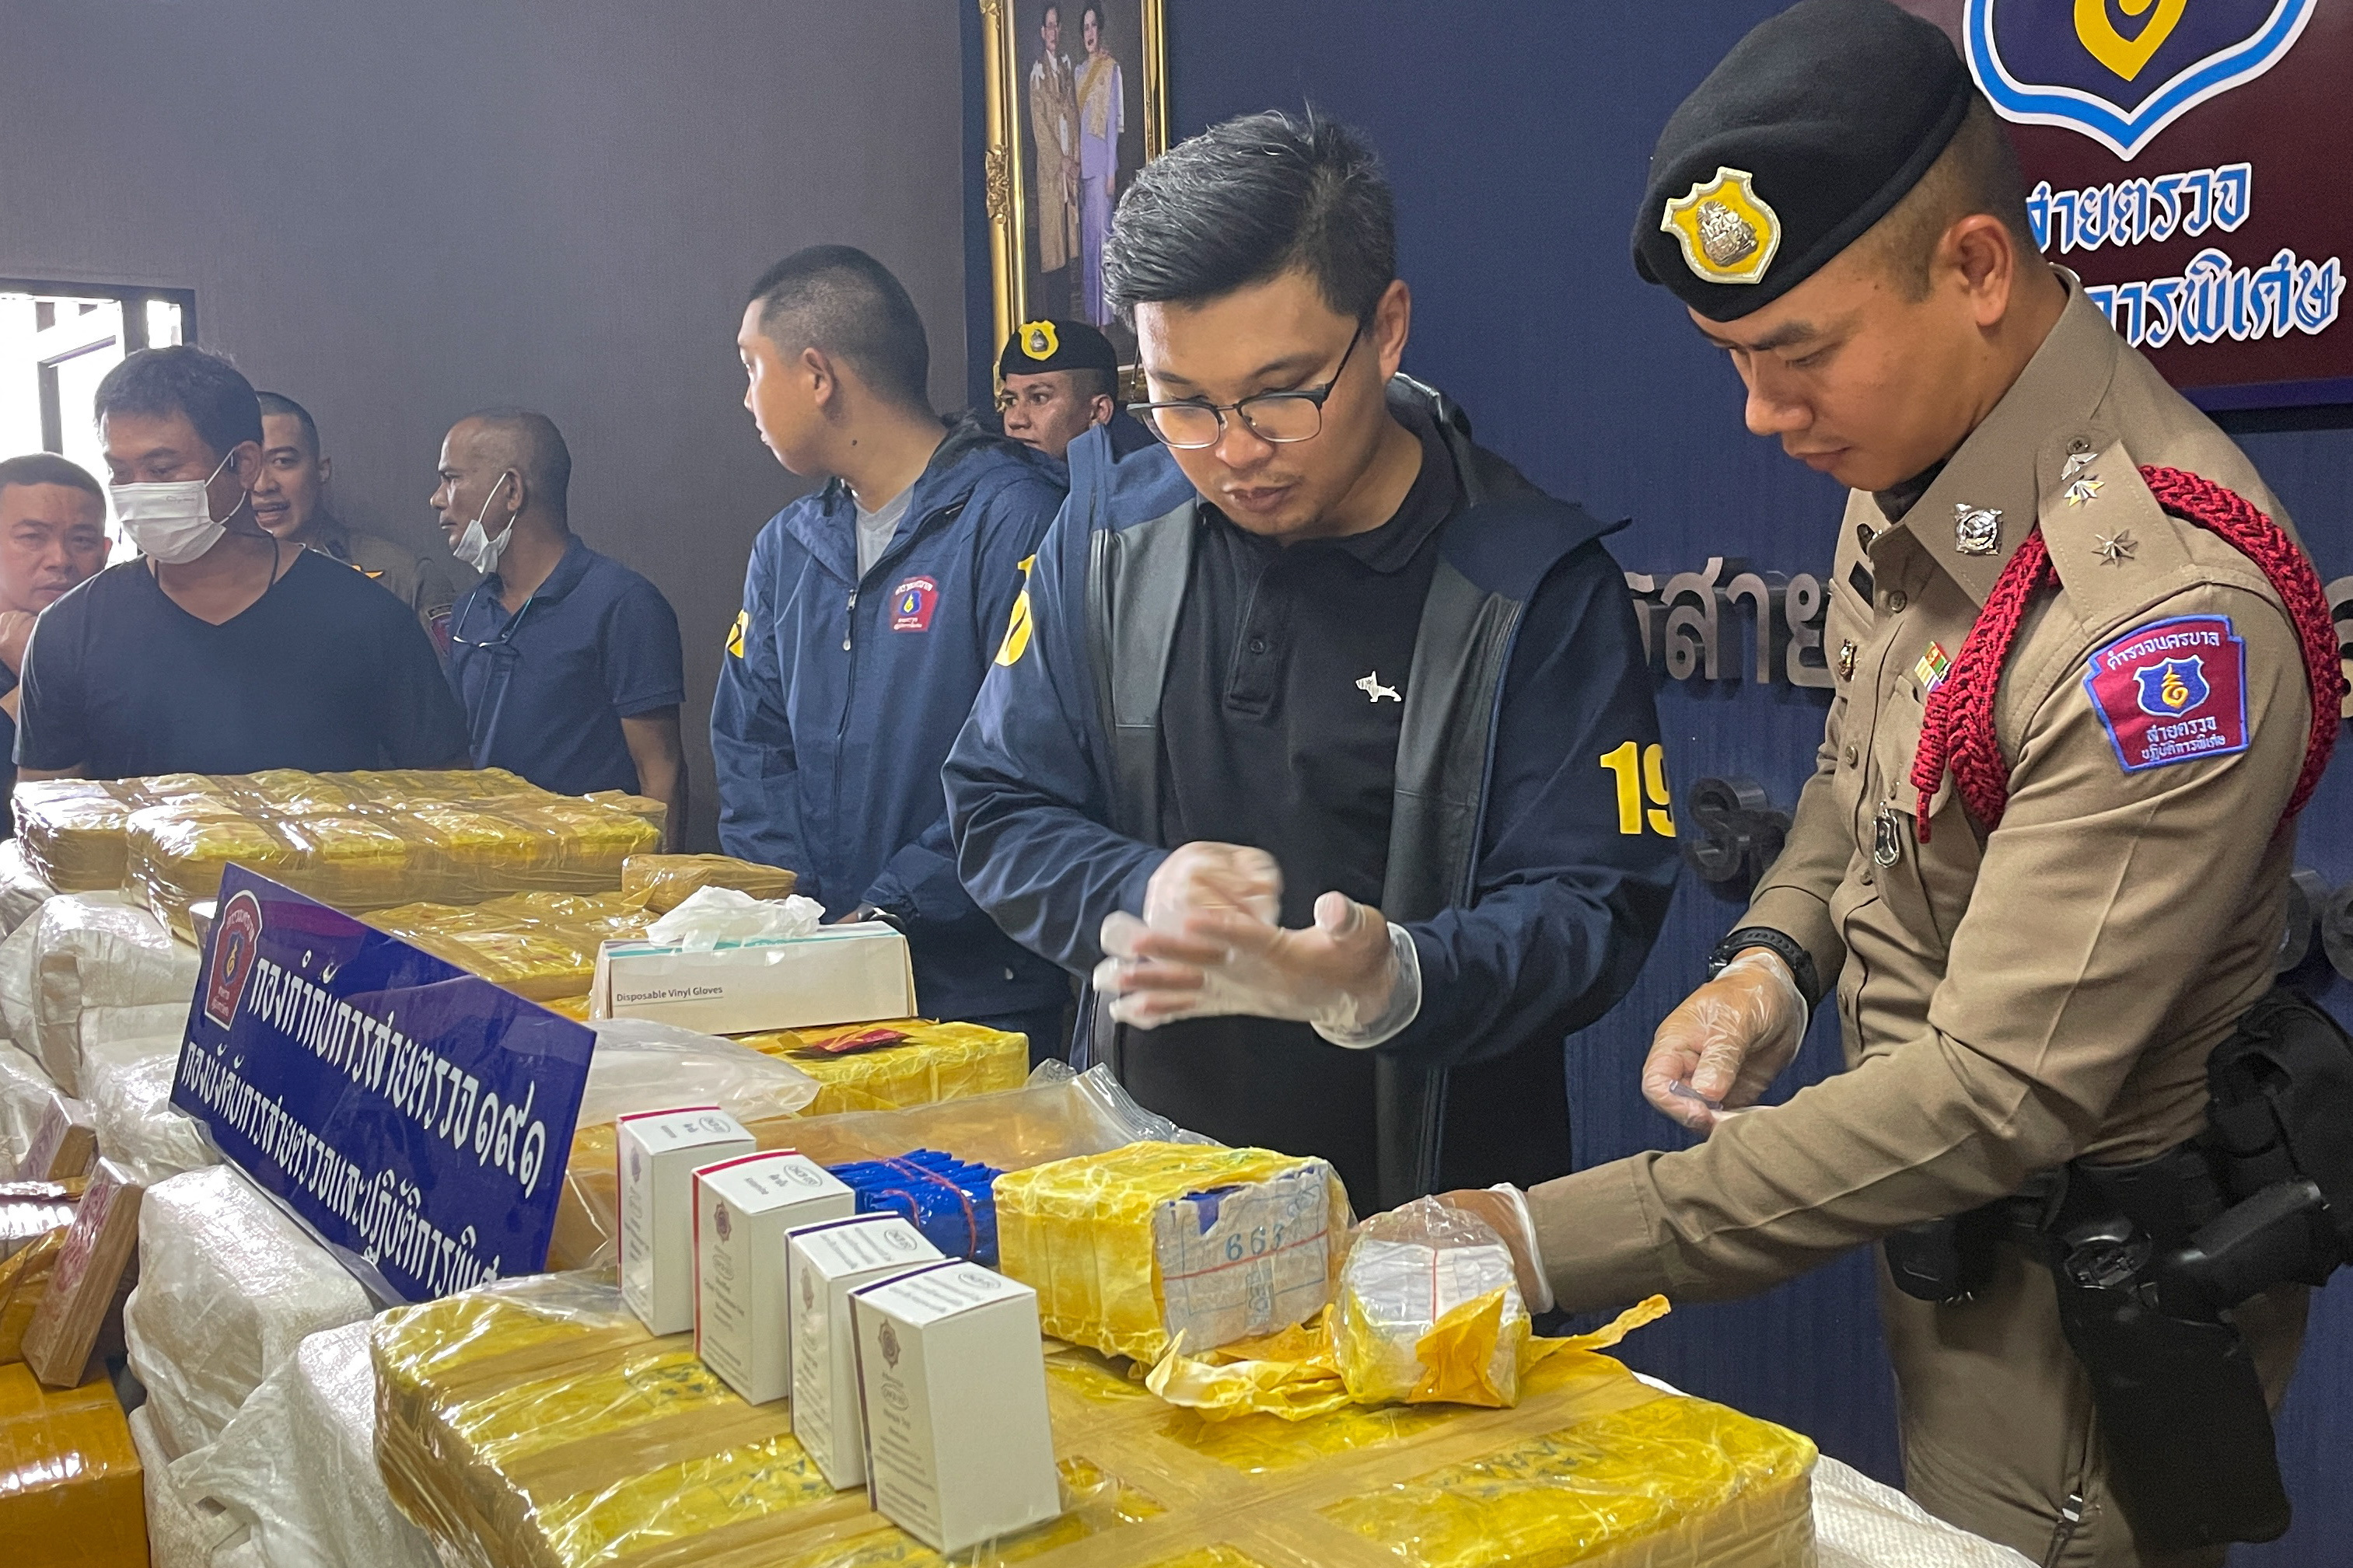 Thai police seize $8.15 million USD worth of methamphetamine pills and other drugs in Bangkok